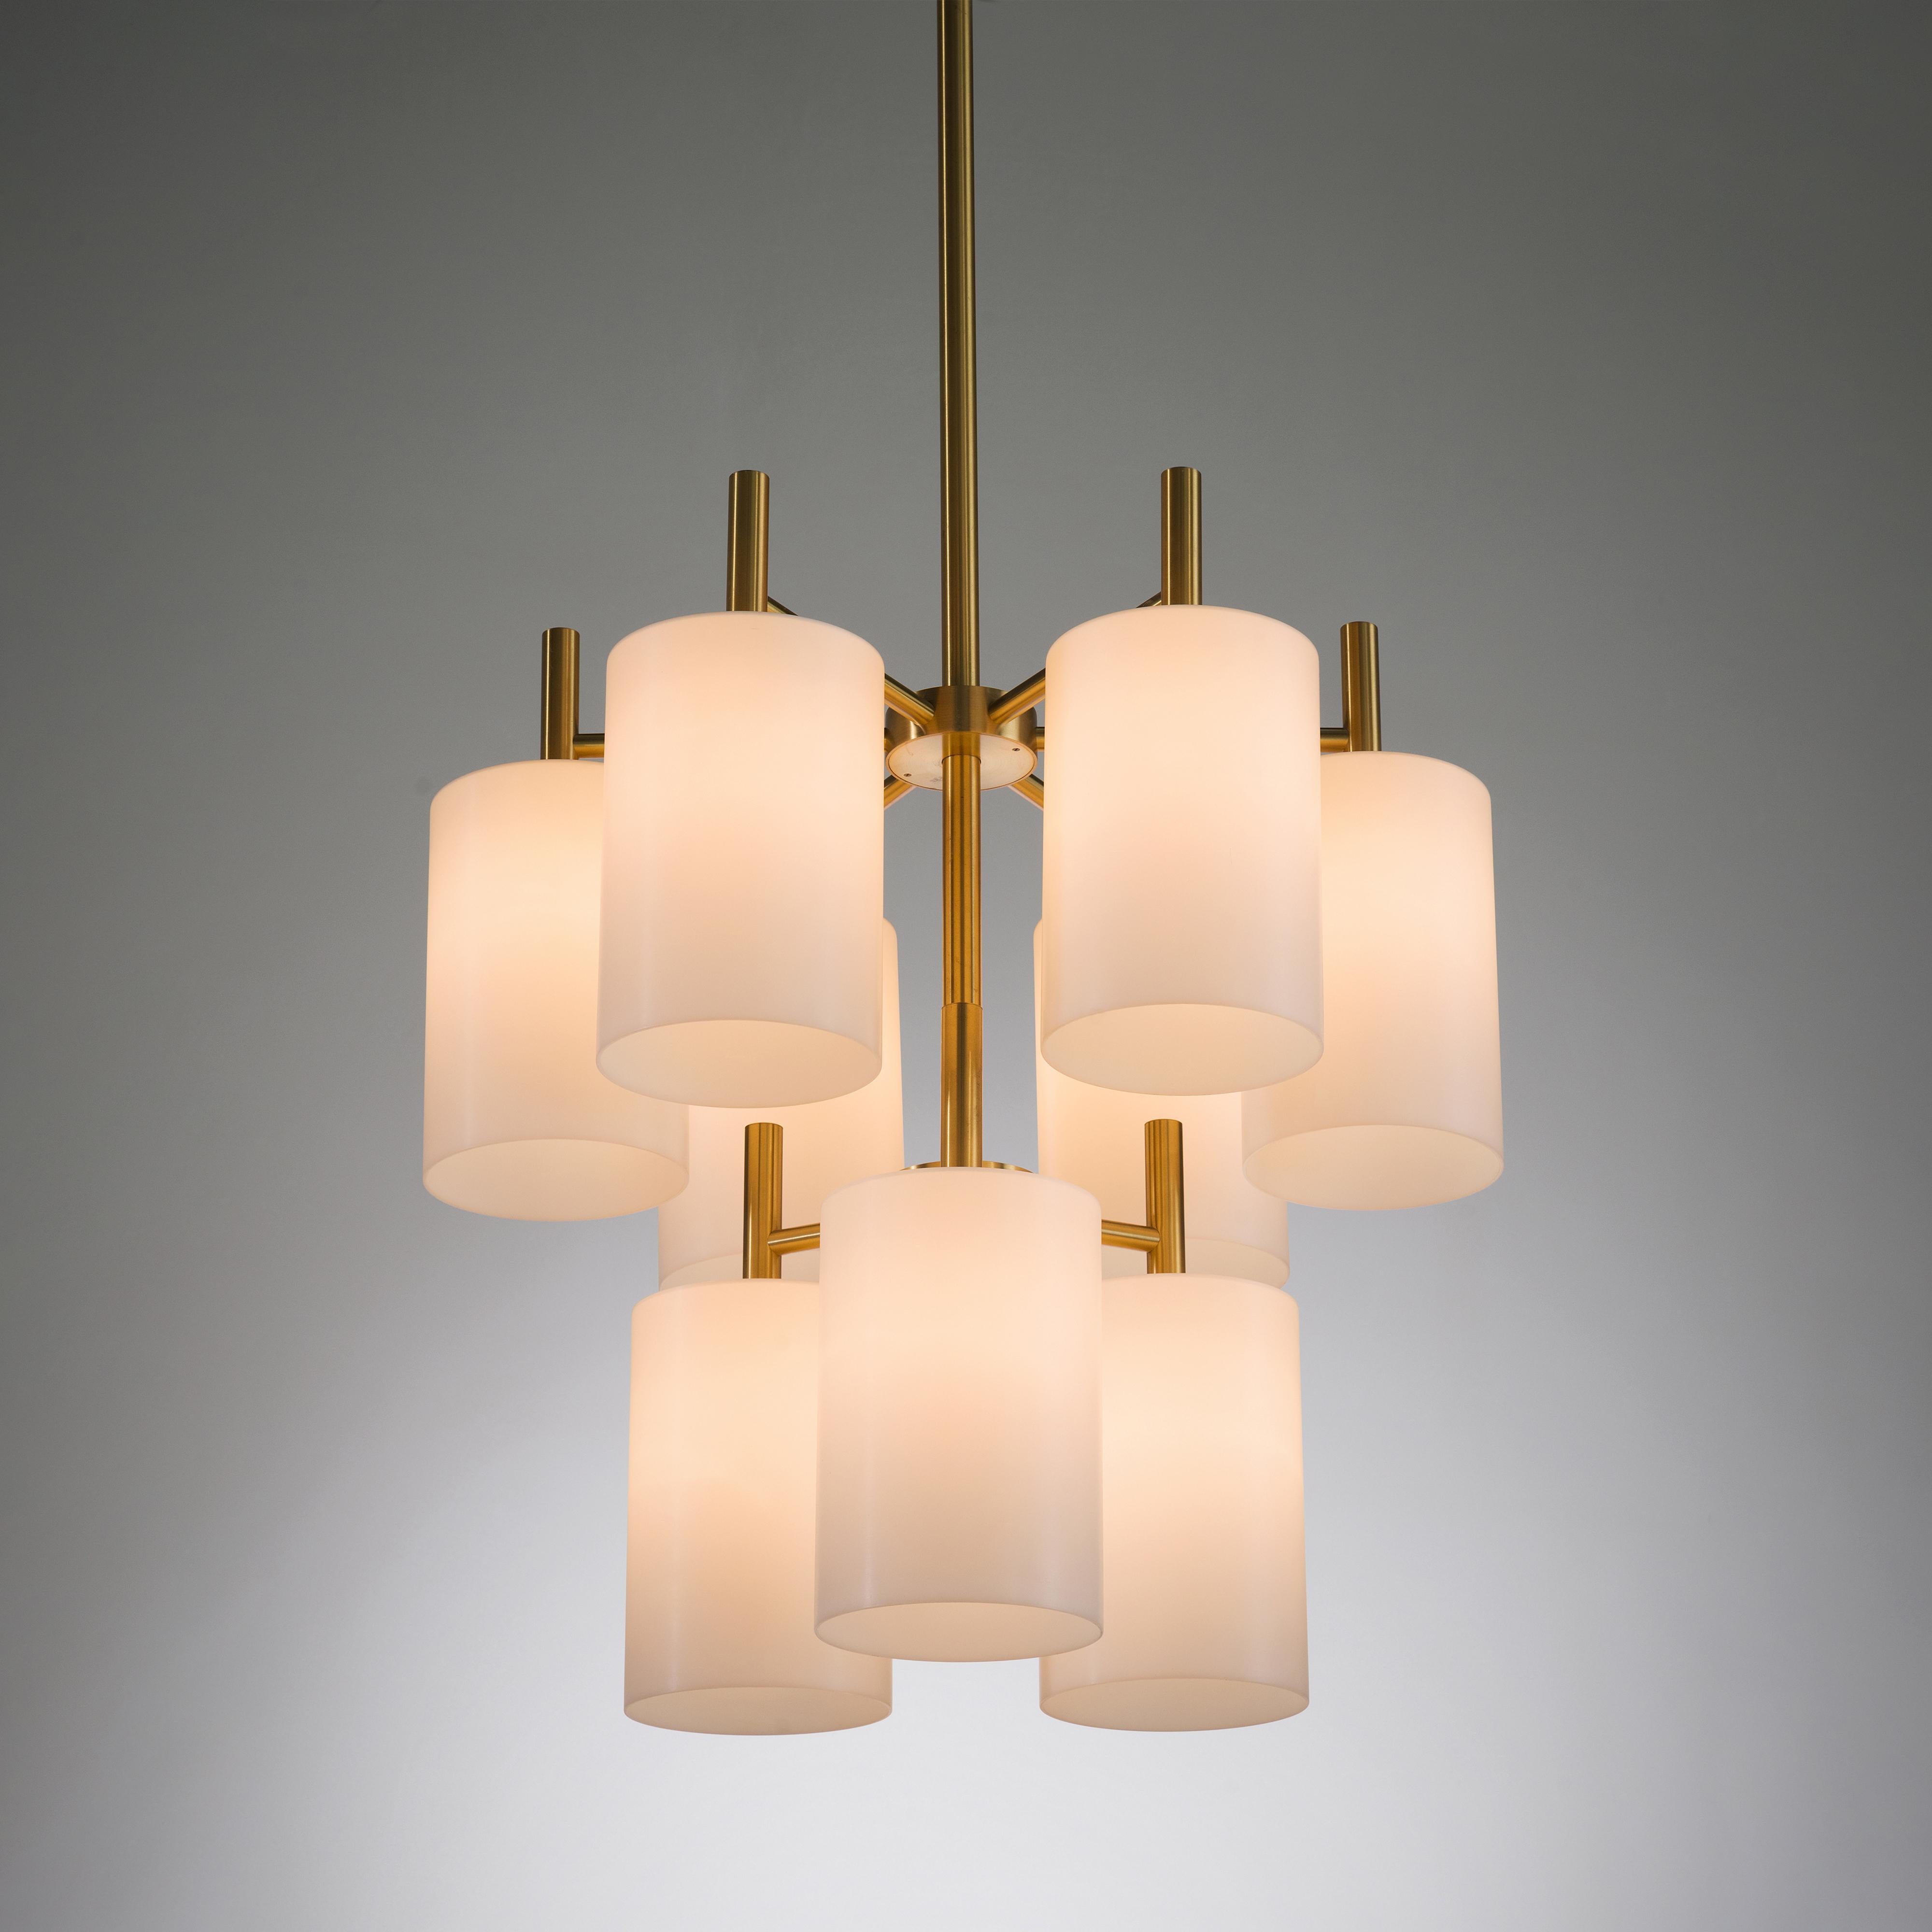 Luxus of Sweden chandeliers, brass, lucite, Sweden, 1960s

These elegant chandeliers are made by the manufacturer Luxus of Sweden. The base of these lovely chandeliers is executed in a warm brass. The tall stems with nine branches all end with a